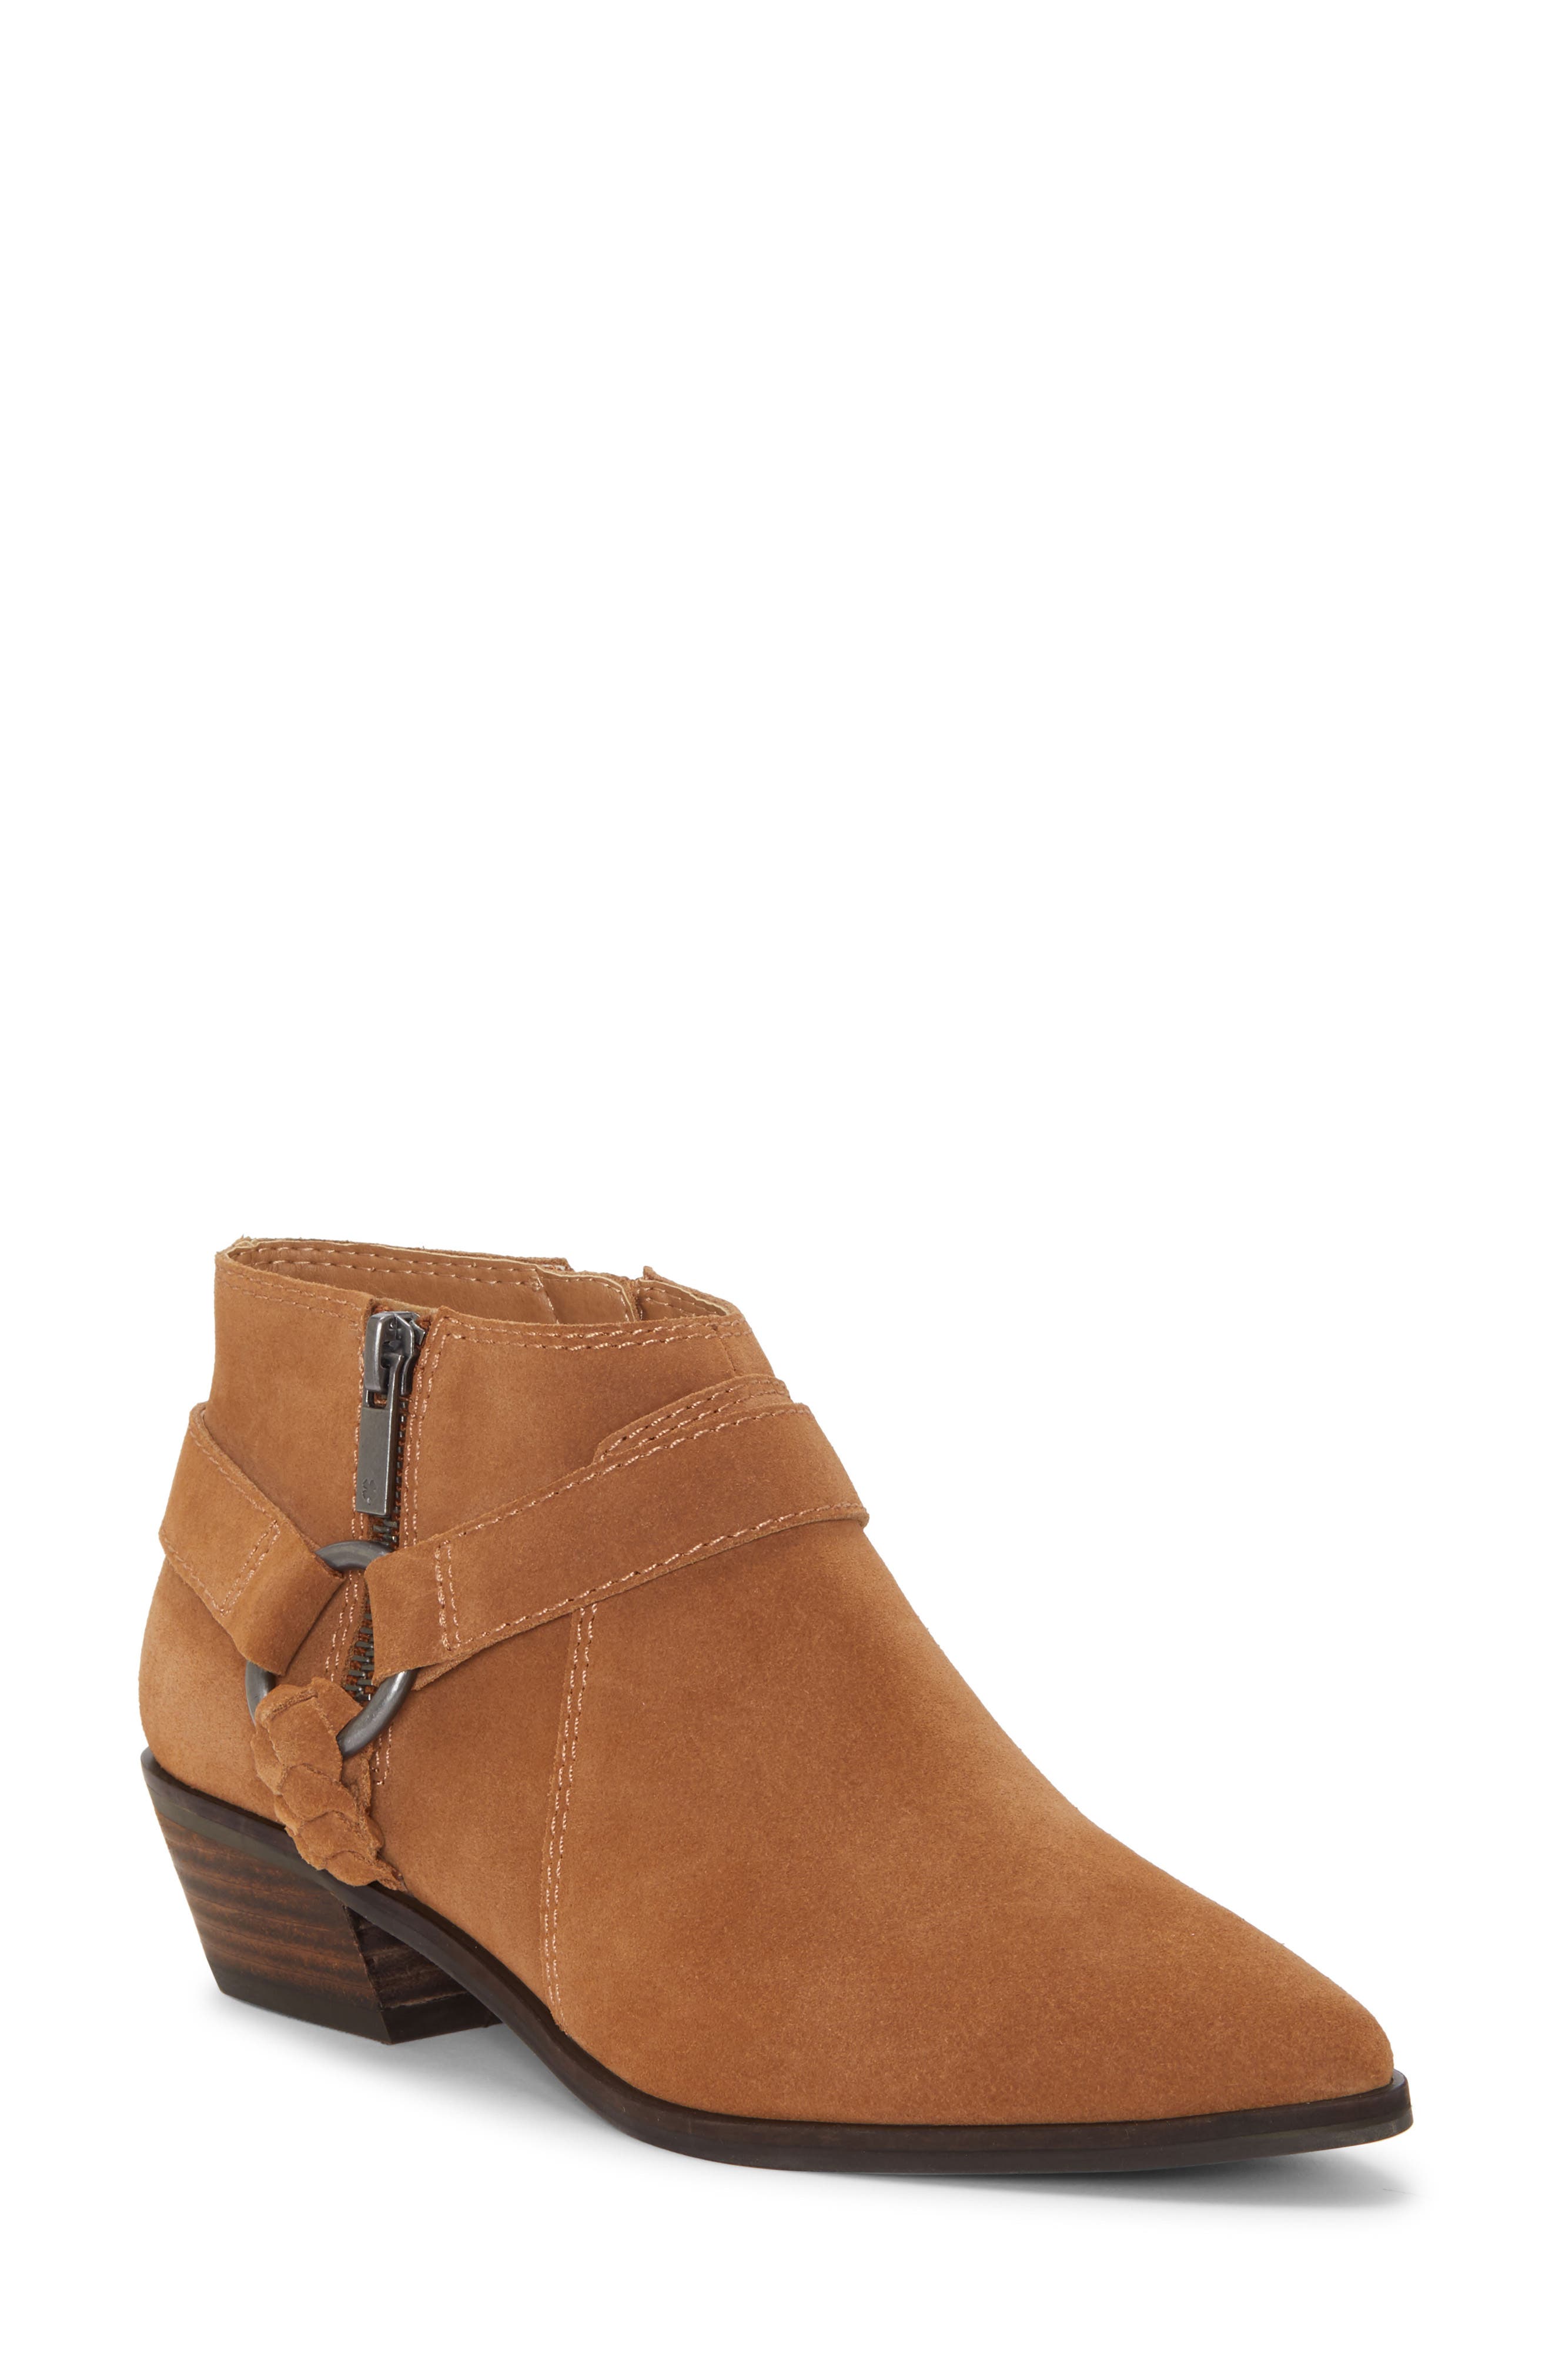 lucky brand bootie